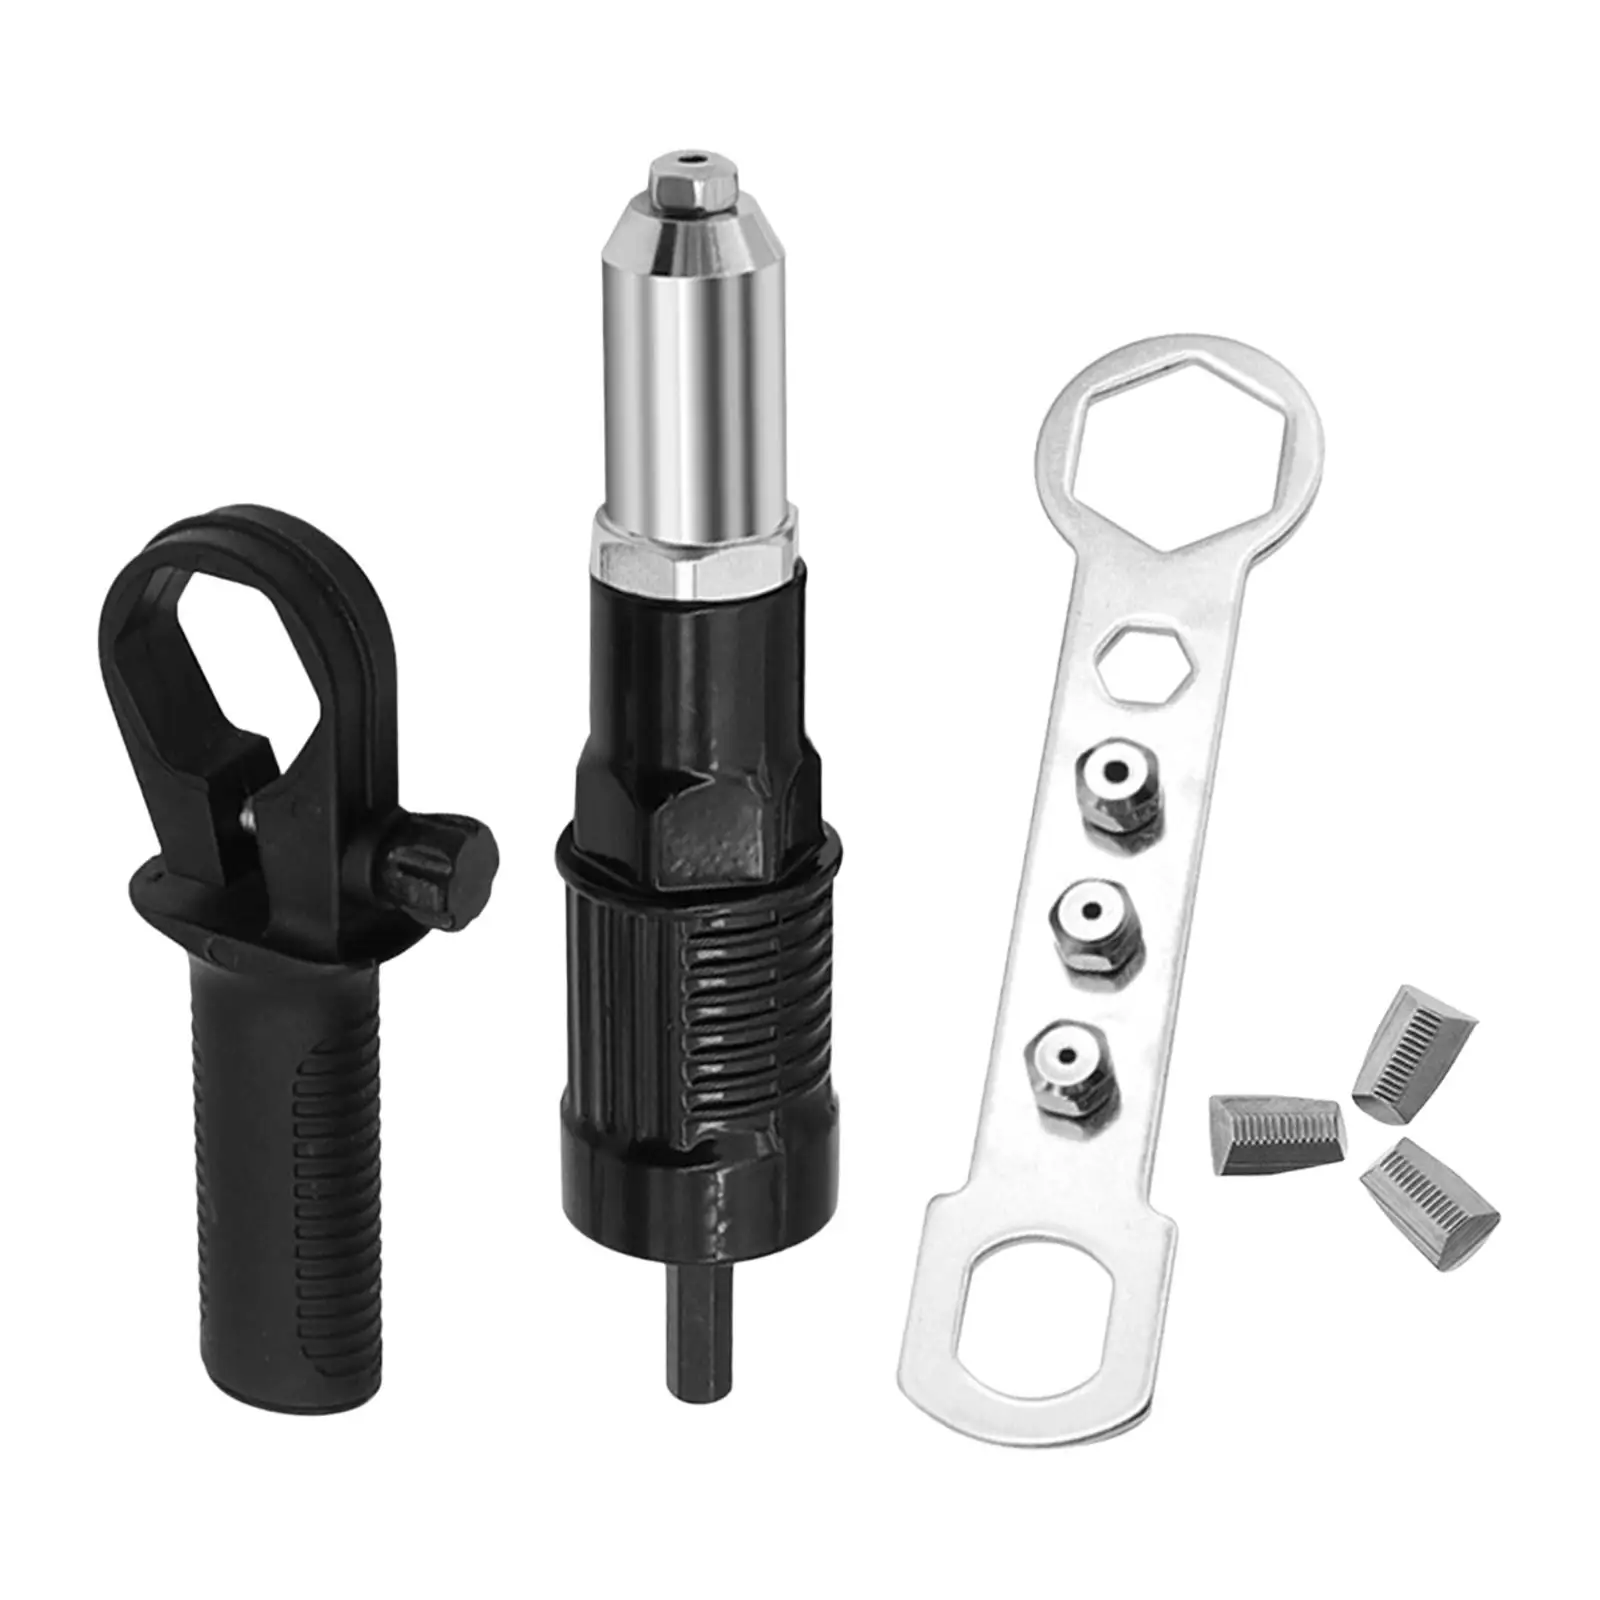 Rivet Connector Accessories Cordless Riveting Drill Joint Adapter Pulling Rivet Machine Joint Pull Riveting Machine Core